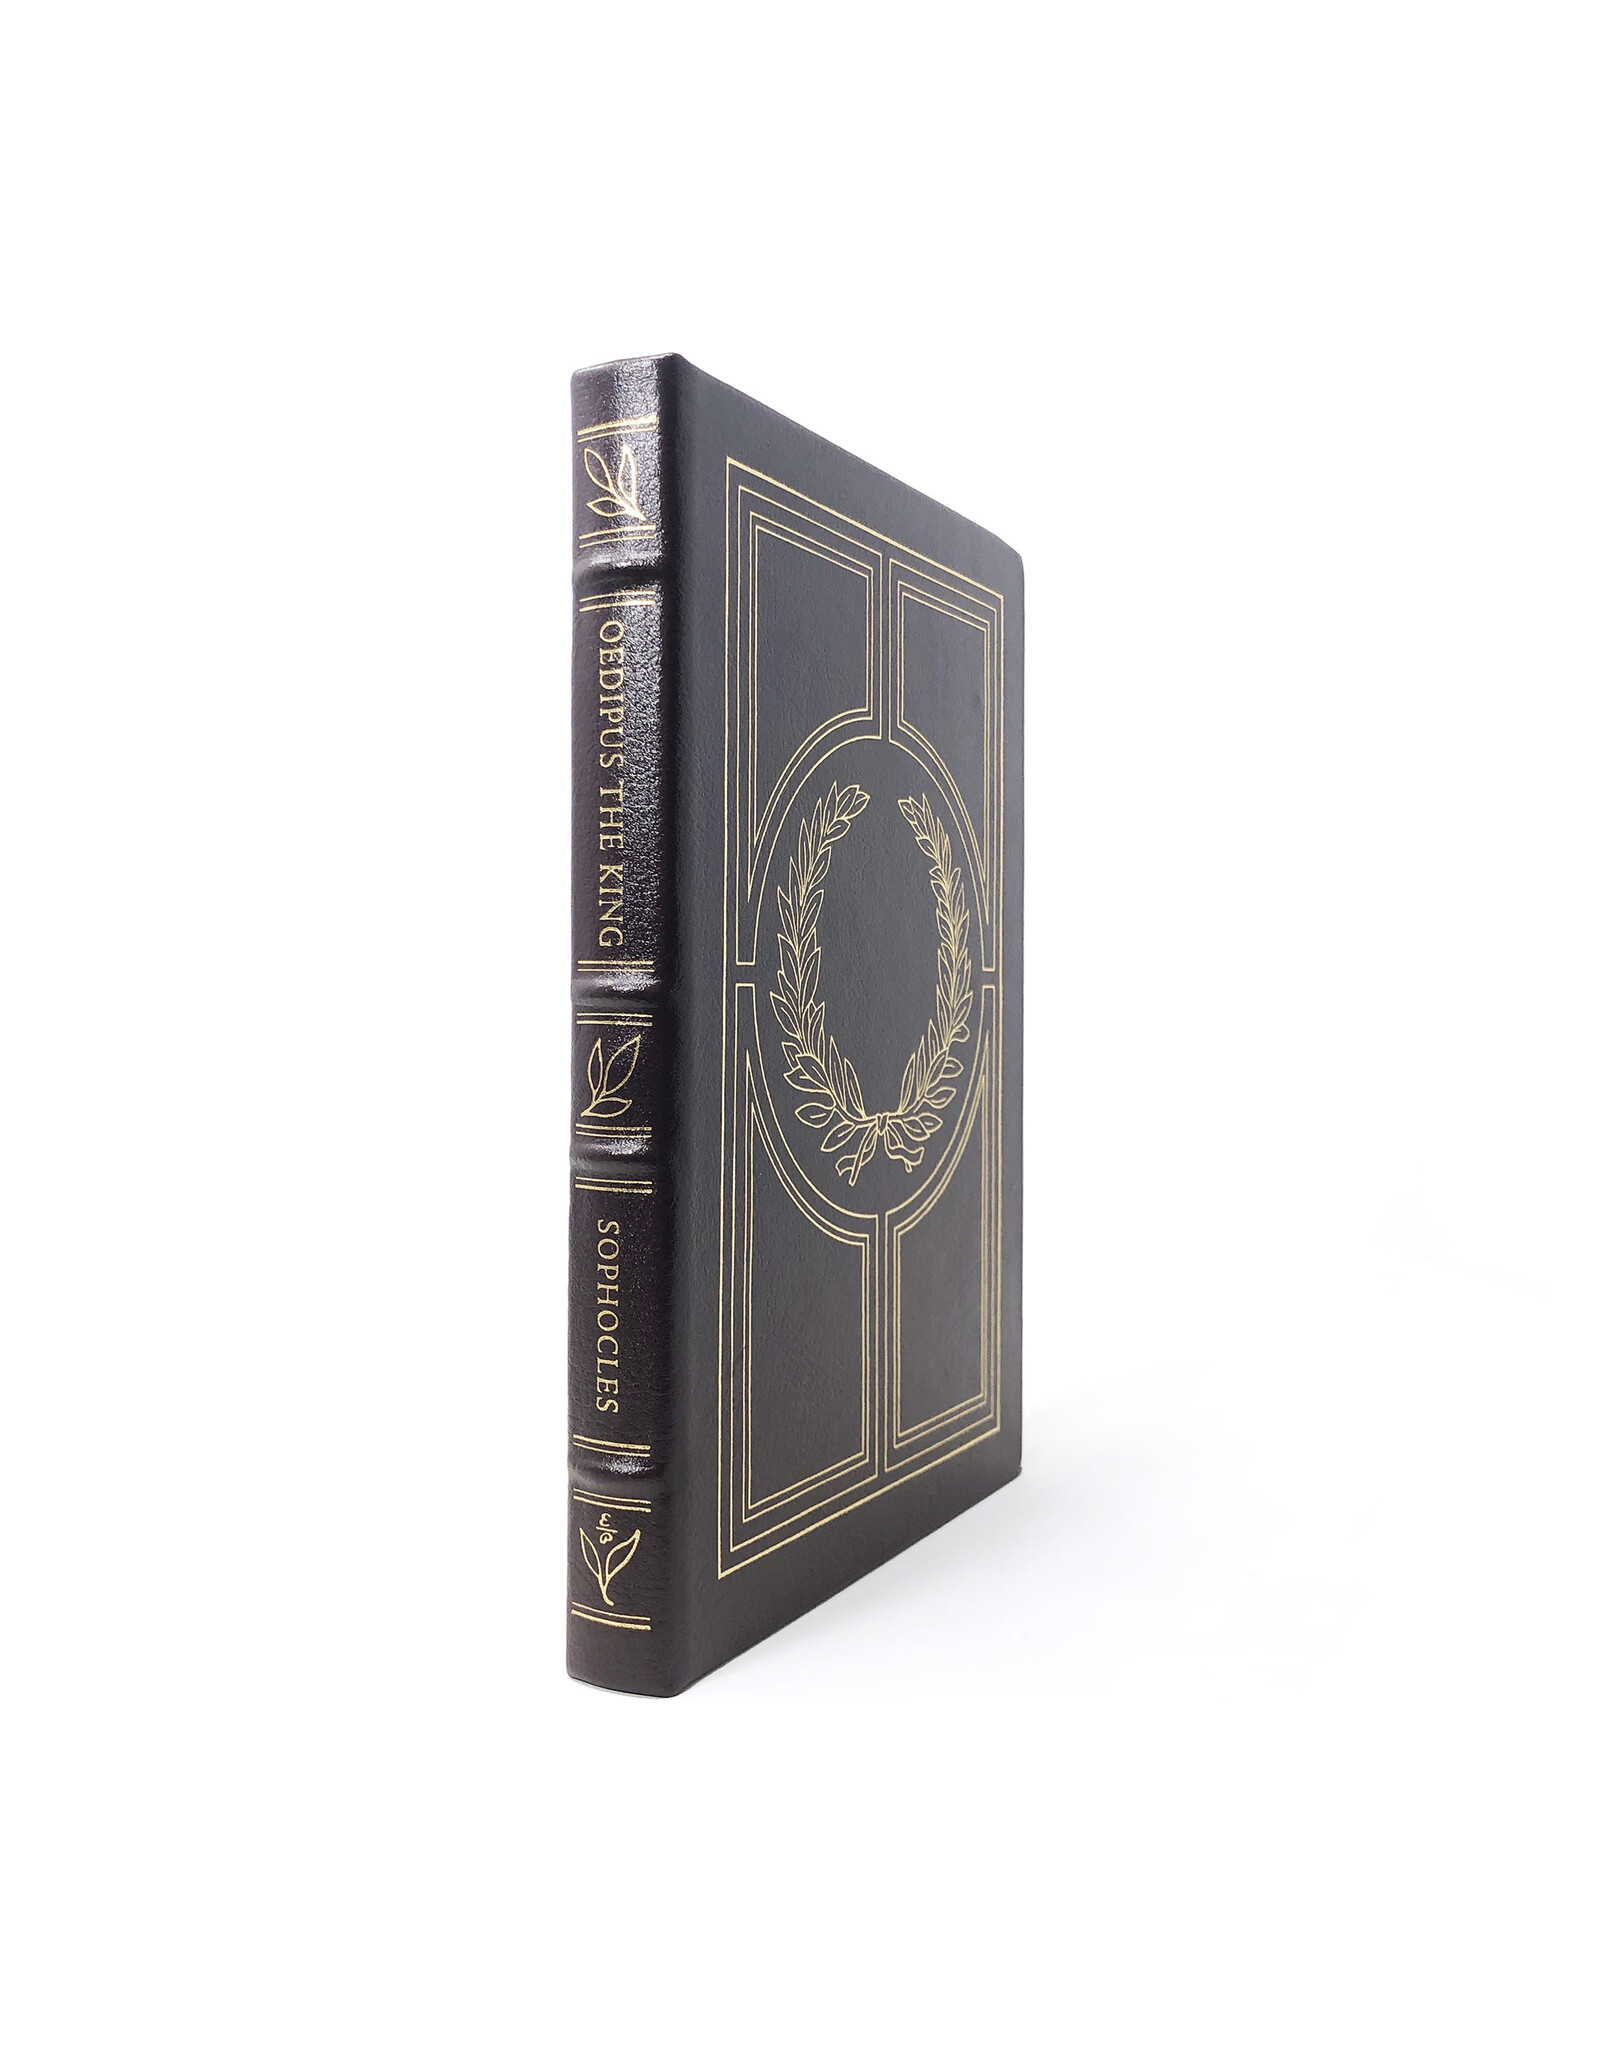 Easton Press Oedipus the King 100 Greatest Books Ever Written Genuine Leather Collector's Edition